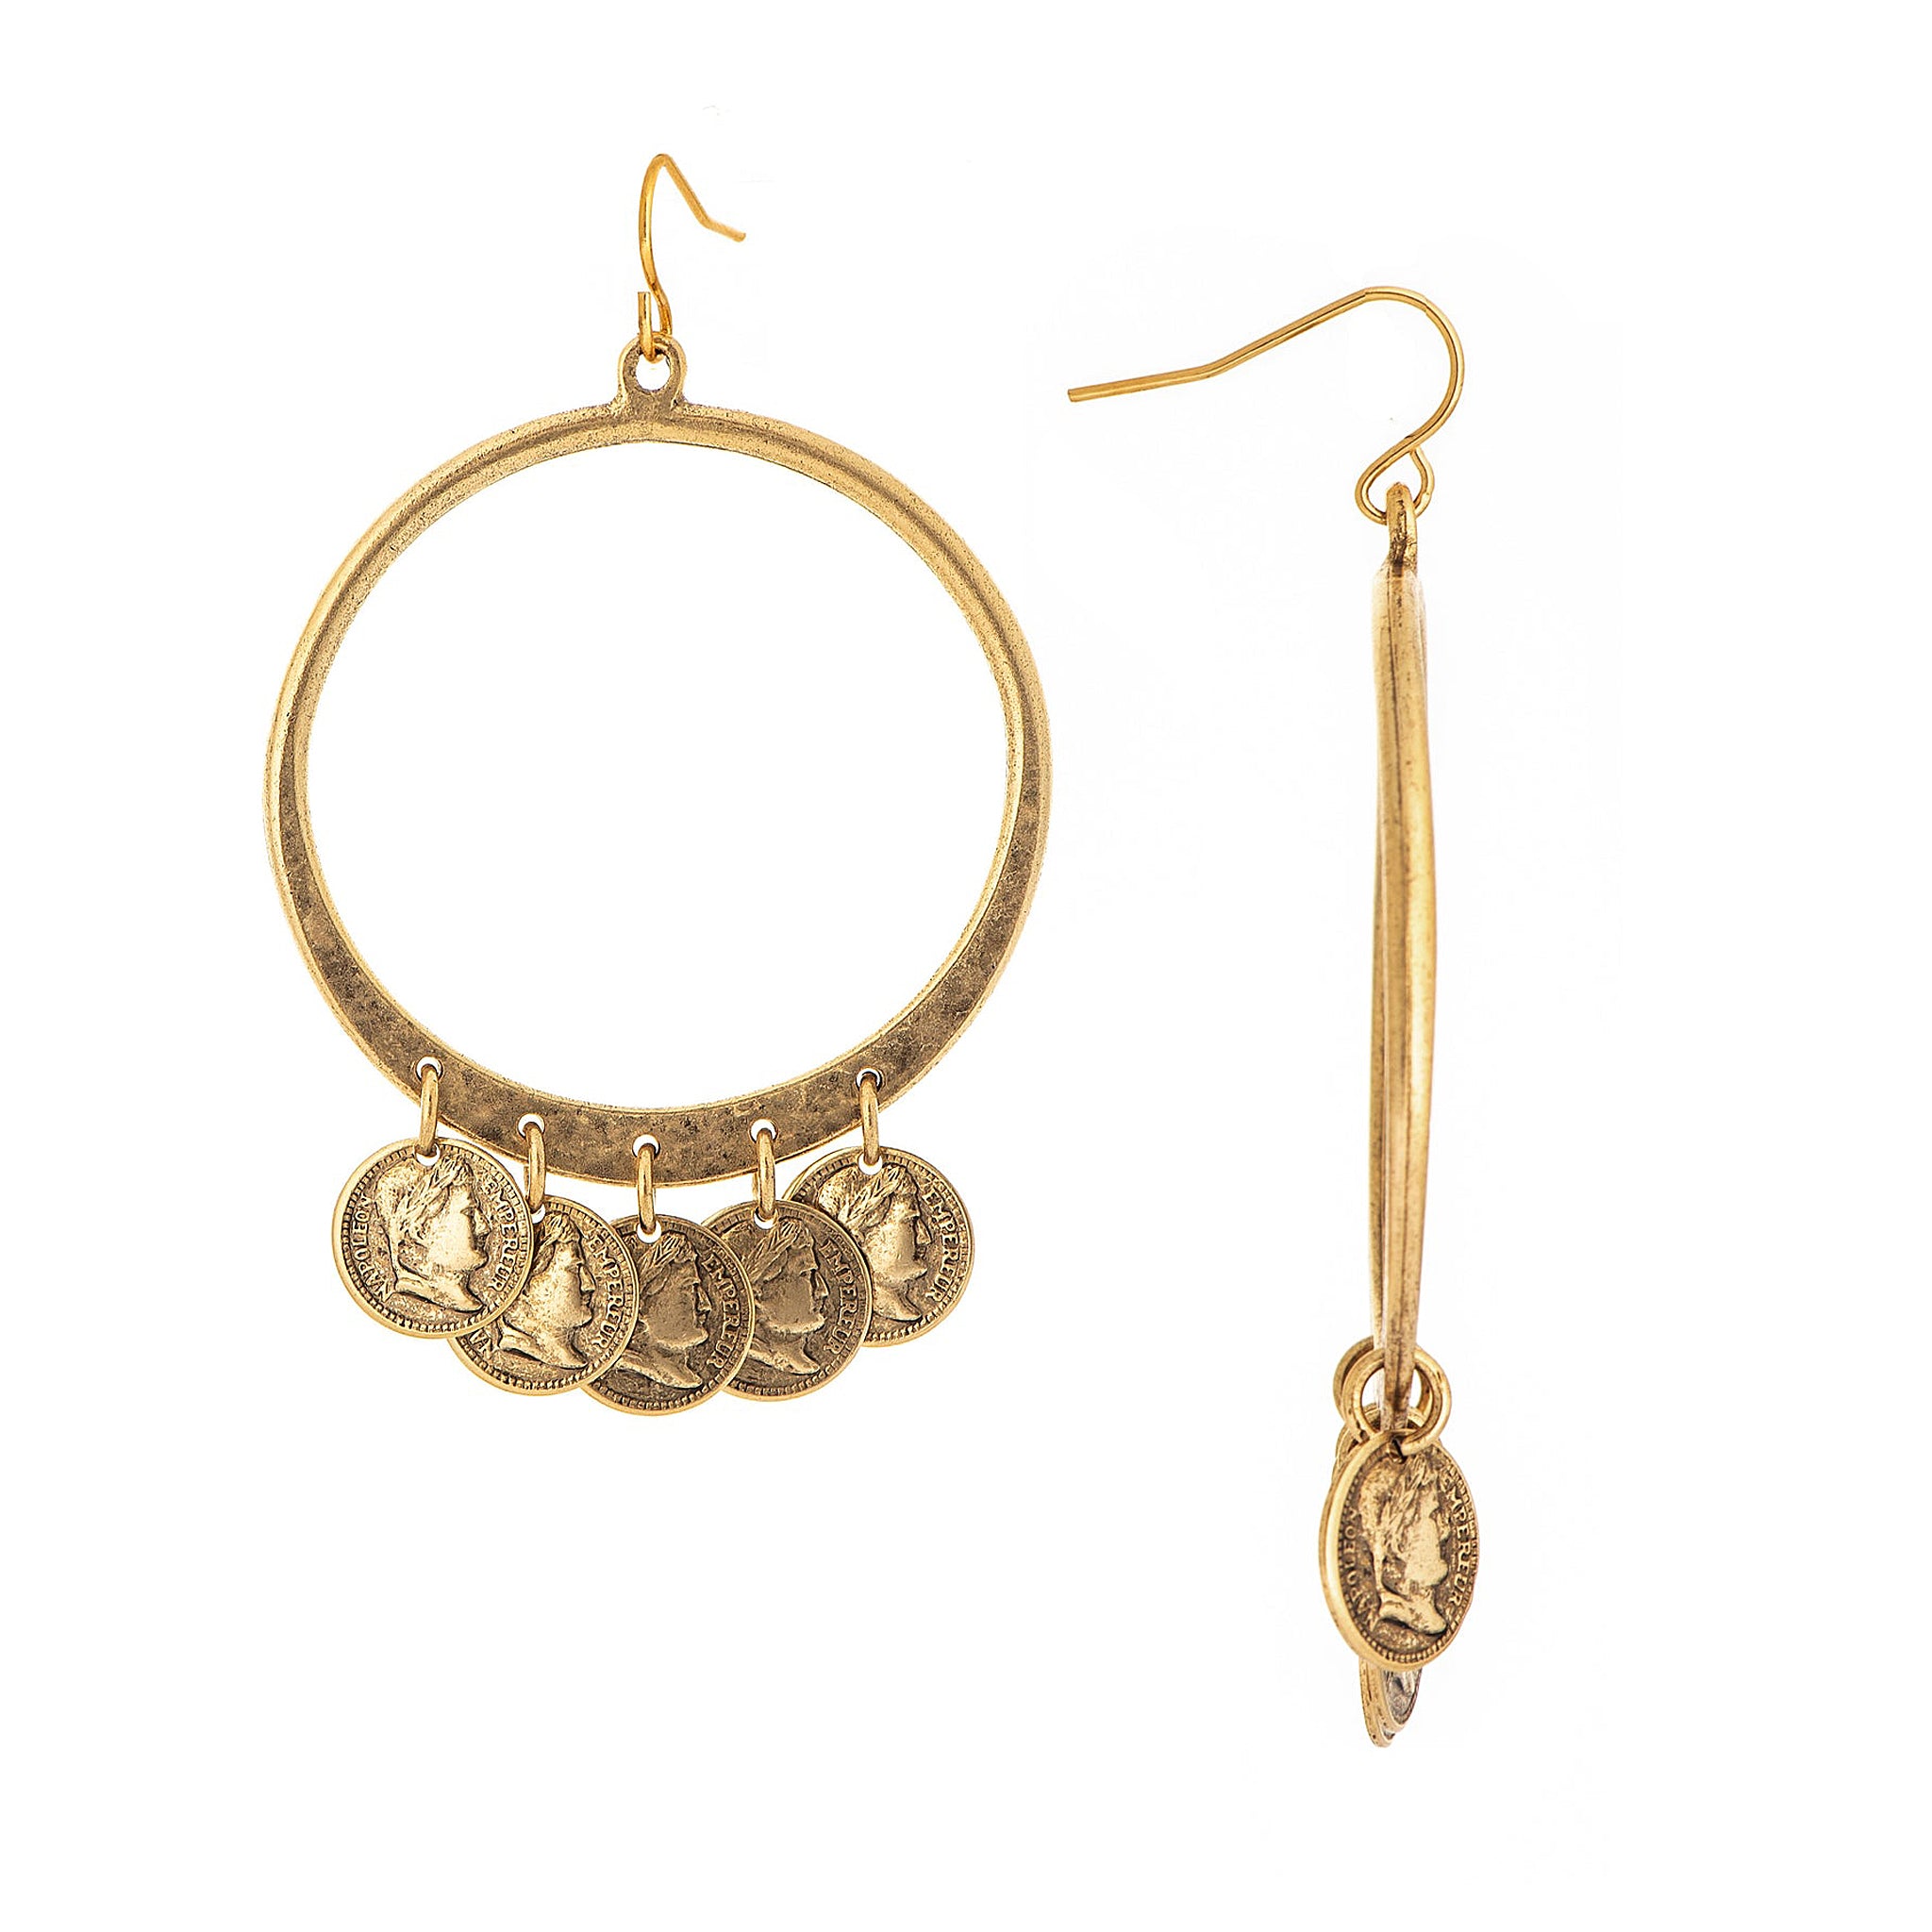 Yochi NY Ambrosio Large Statement Hoop Coin Charm Earrings in 22k Gold